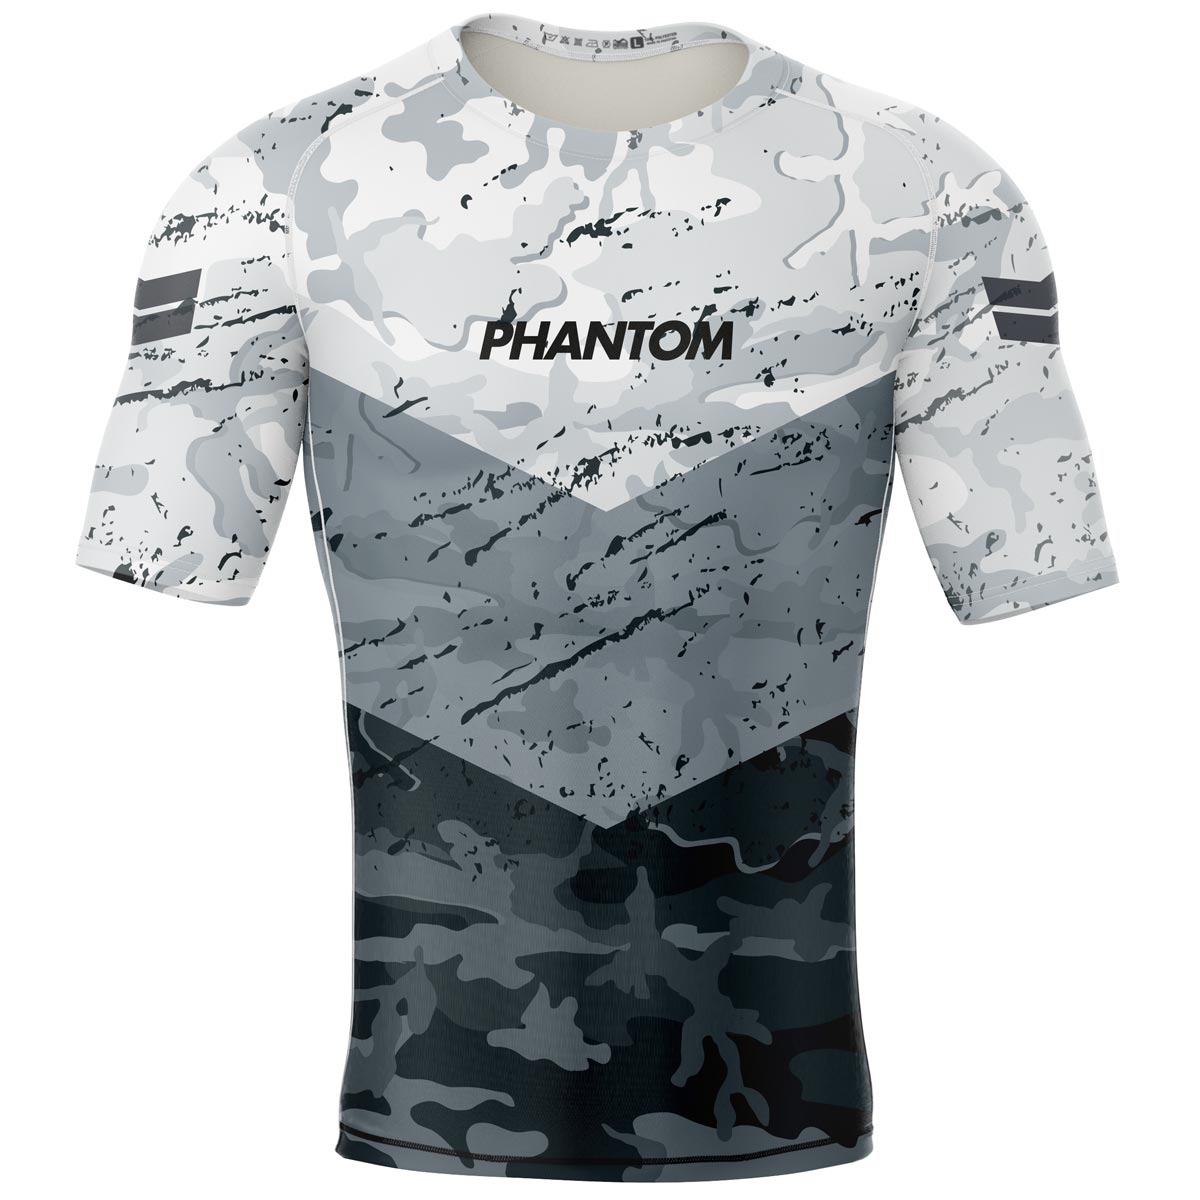 Phantom Rashguard for your martial arts. Tight-fitting compression top for MMA, BJJ, wrestling, Muay Thai and other fight sports.